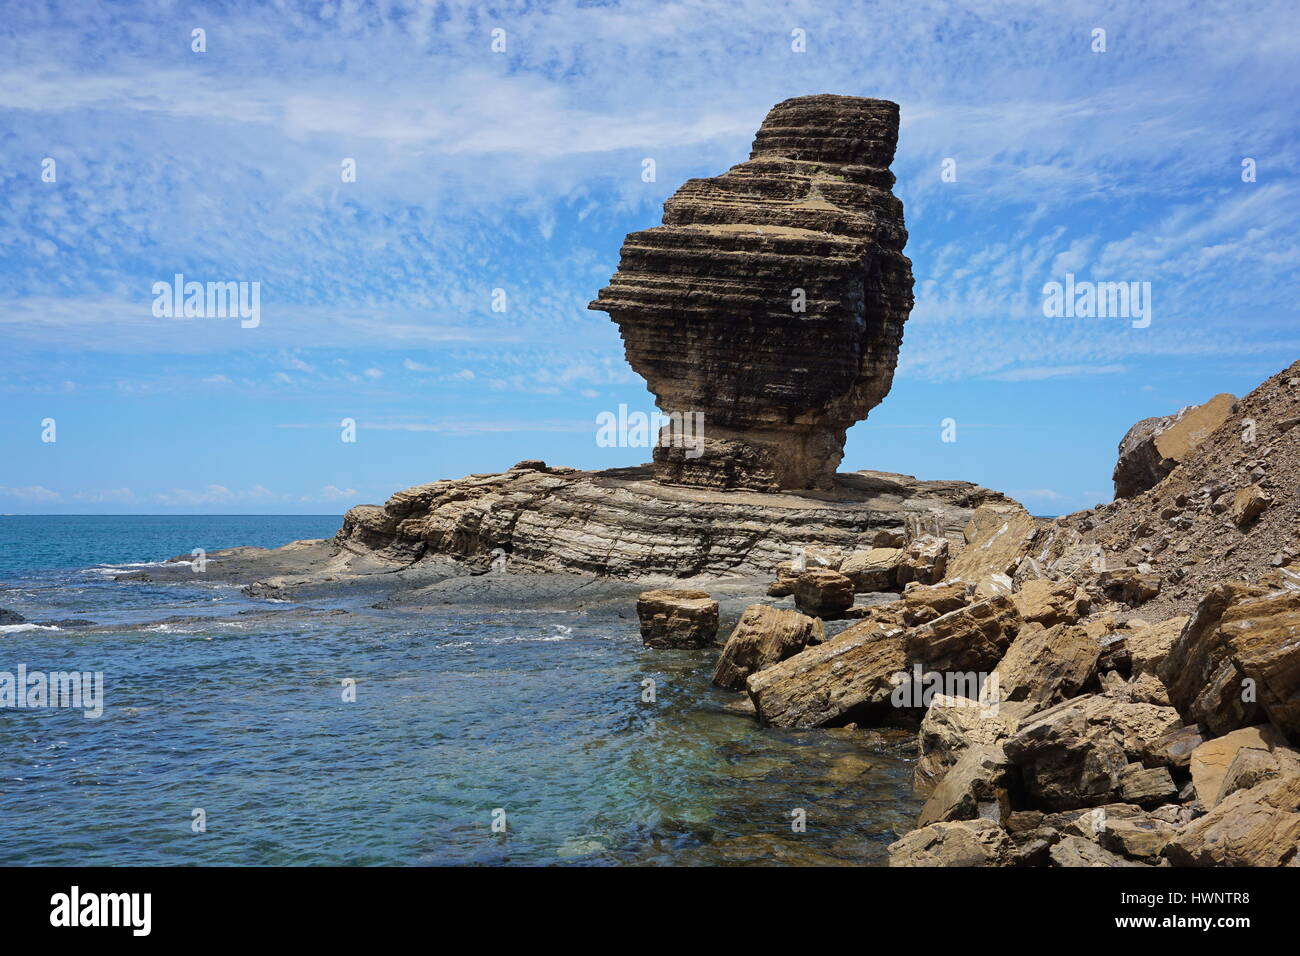 Rock formation on the sea shore, the Bonhomme of Bourail, New Caledonia, Grande Terre island, south Pacific Stock Photo